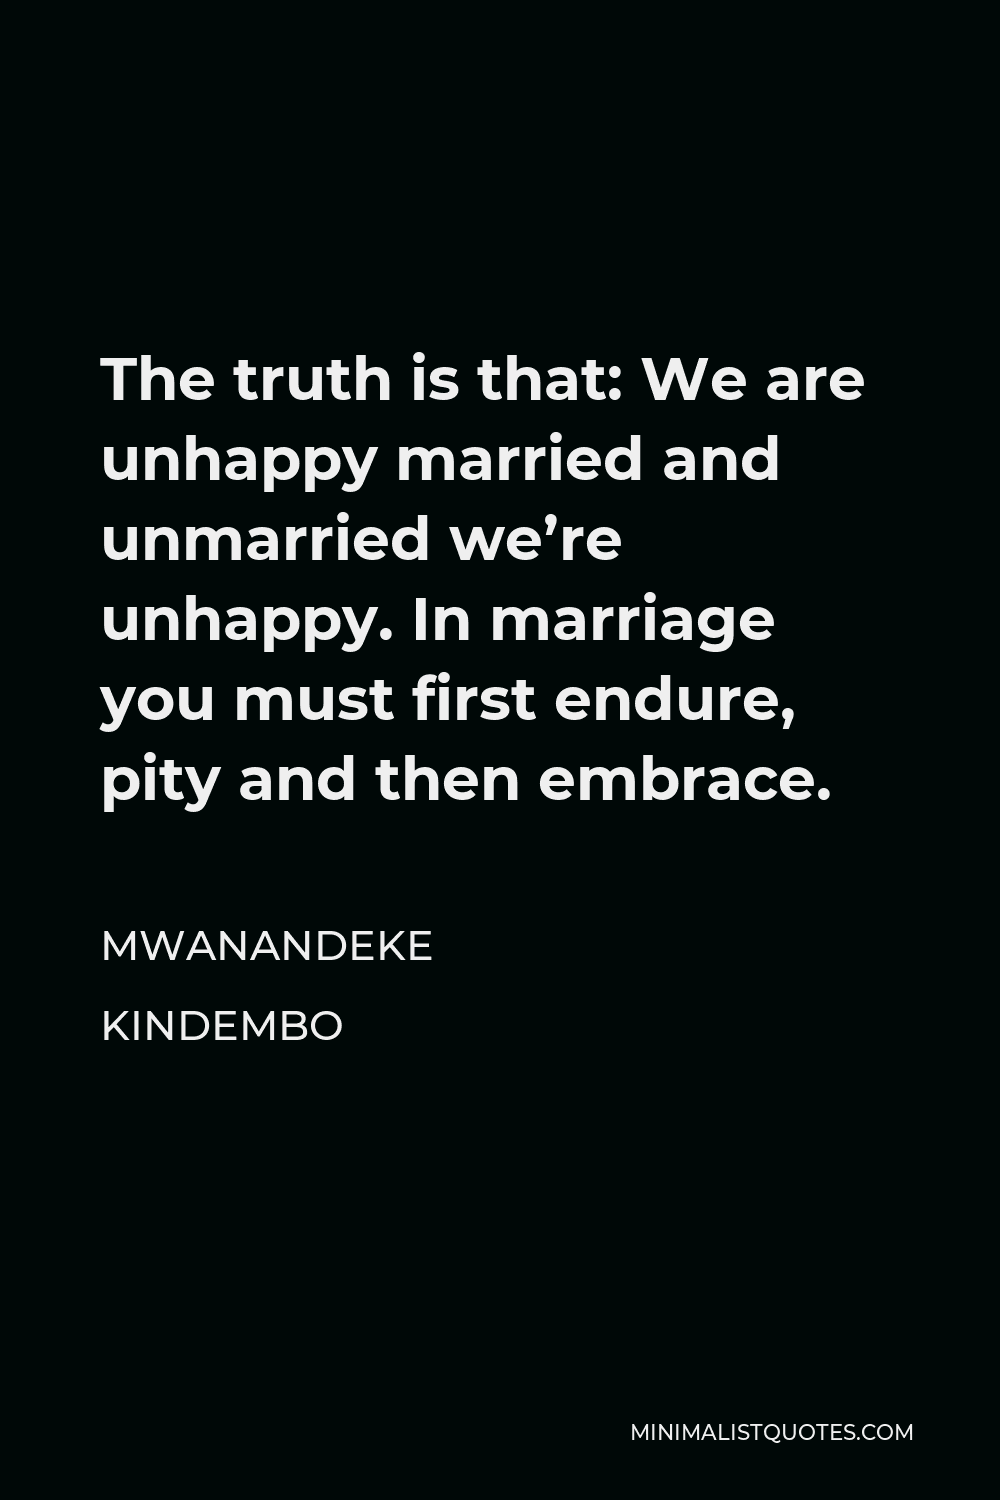 Mwanandeke Kindembo Quote - The truth is that: We are unhappy married and unmarried we’re unhappy. In marriage you must first endure, pity and then embrace.